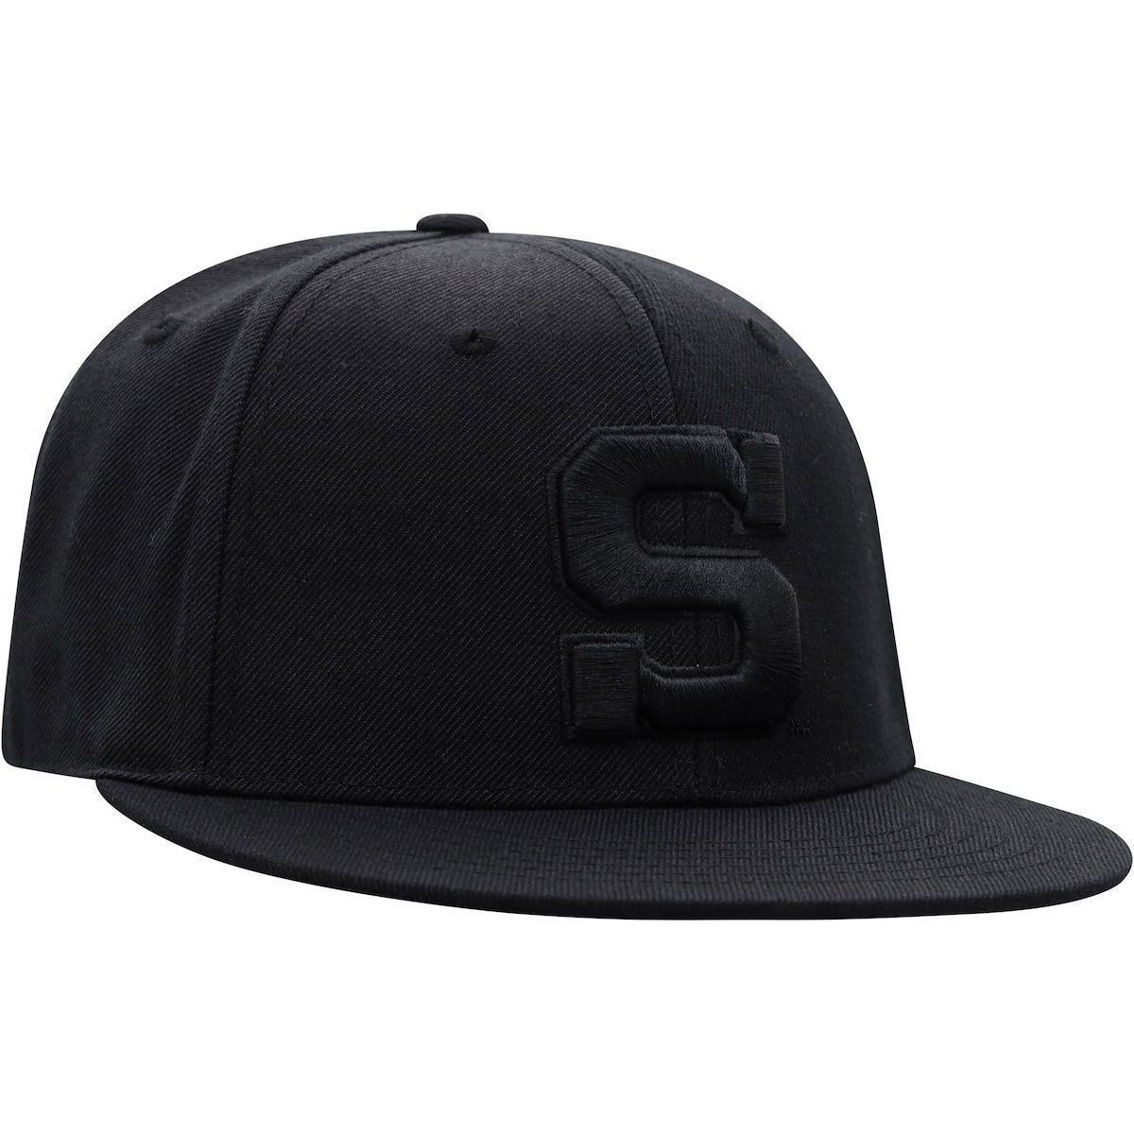 Top of the World Men's Penn State Nittany Lions Black On Black Fitted Hat - Image 4 of 4